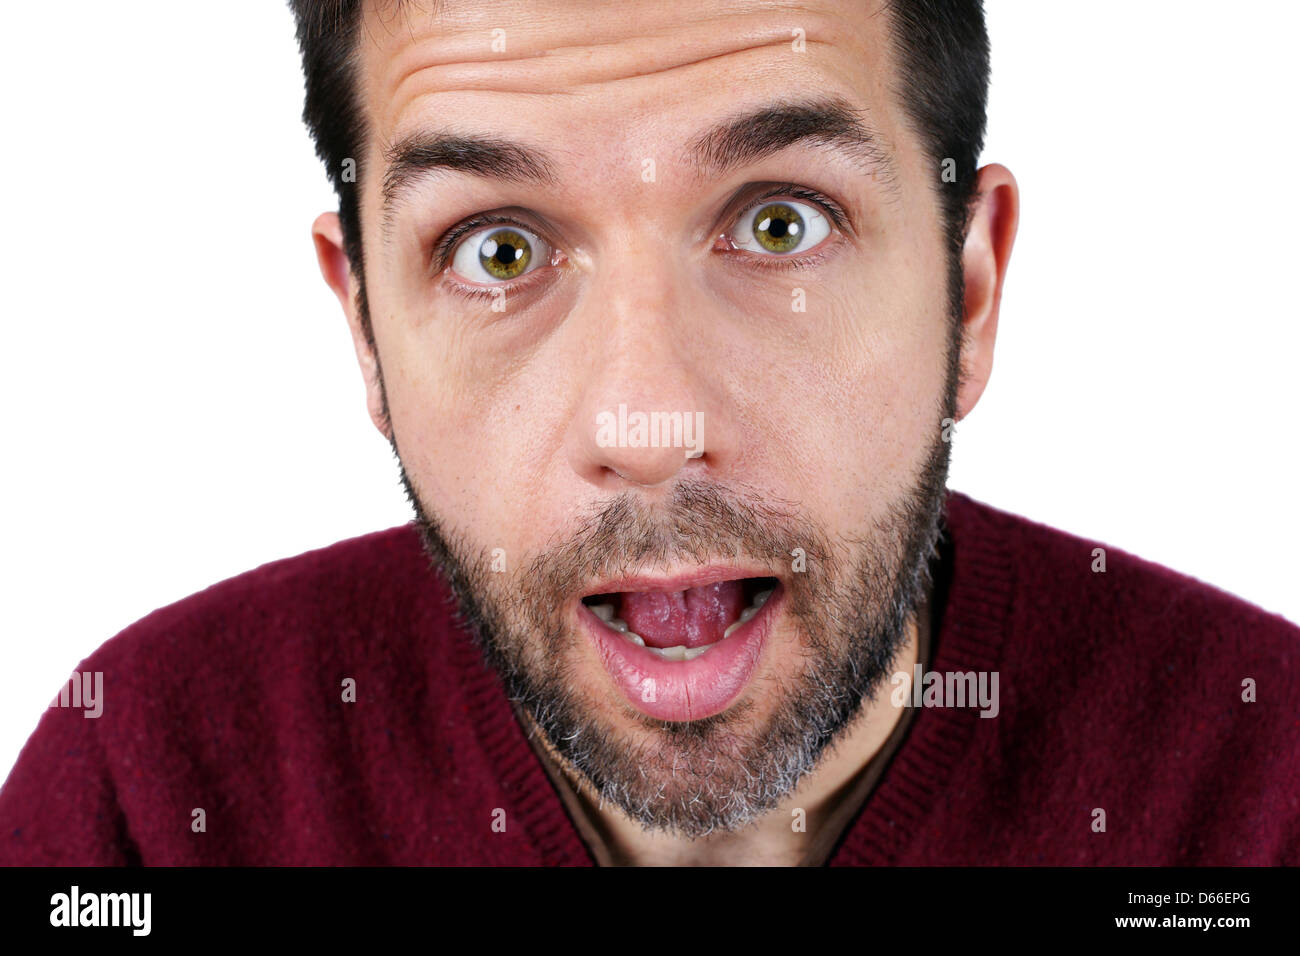 Portrait of a surprised middle-aged caucasian man Stock Photo